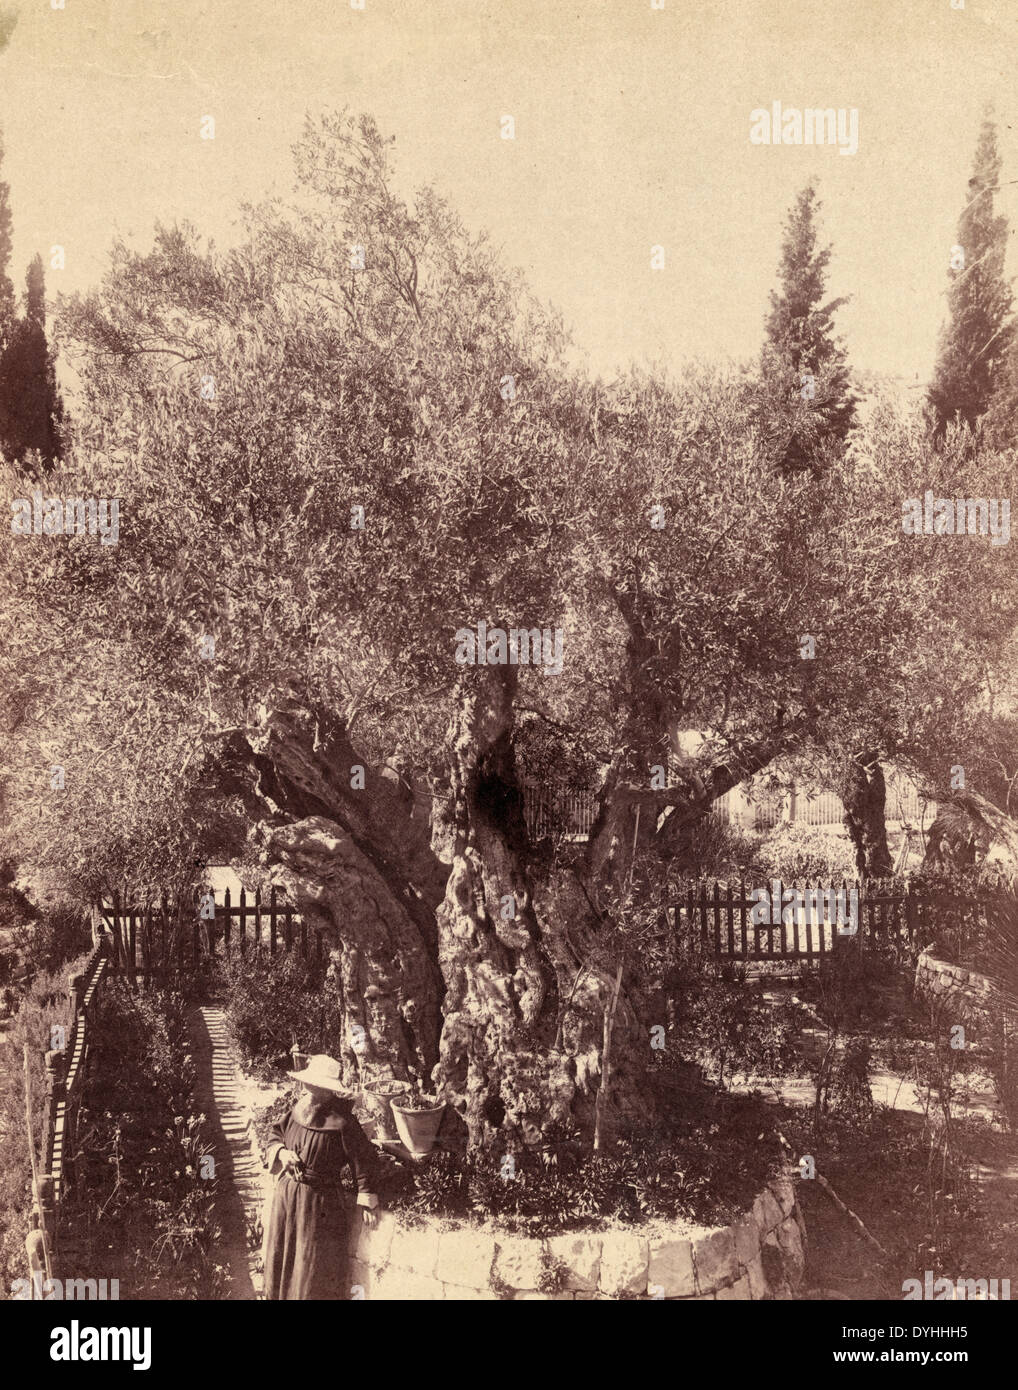 Ancient olive trees cared for by Franciscan monks, Palestine, Jerusalem, Garden of Gethsemane, circa 1900 Stock Photo